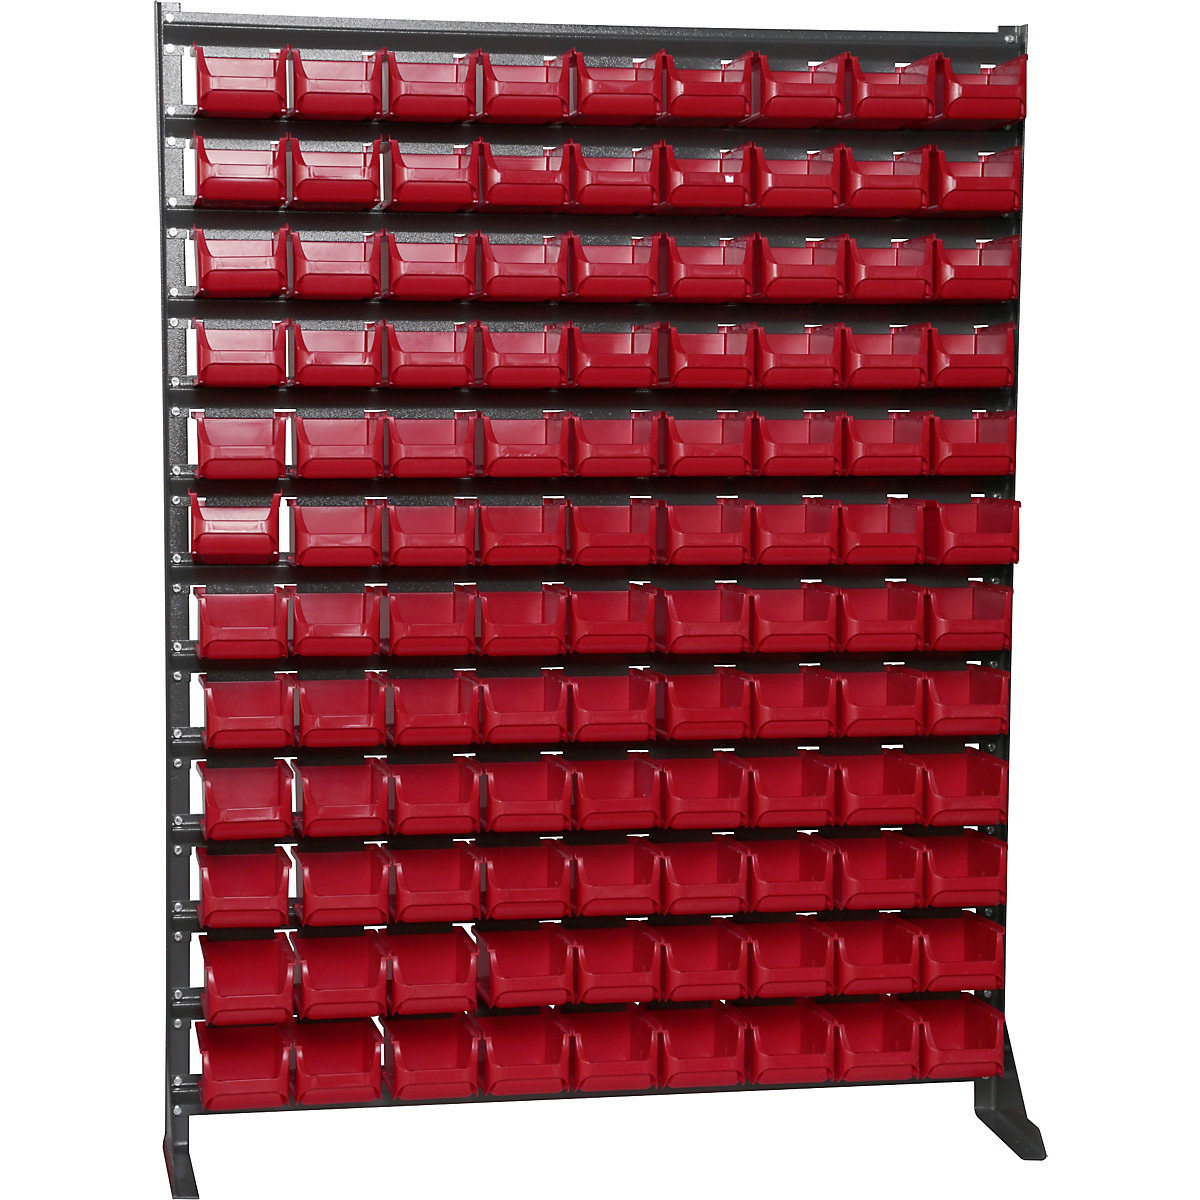 Small parts shelf unit, width 1020 mm, with open fronted storage bins, HxD 1320 x 200 mm-3